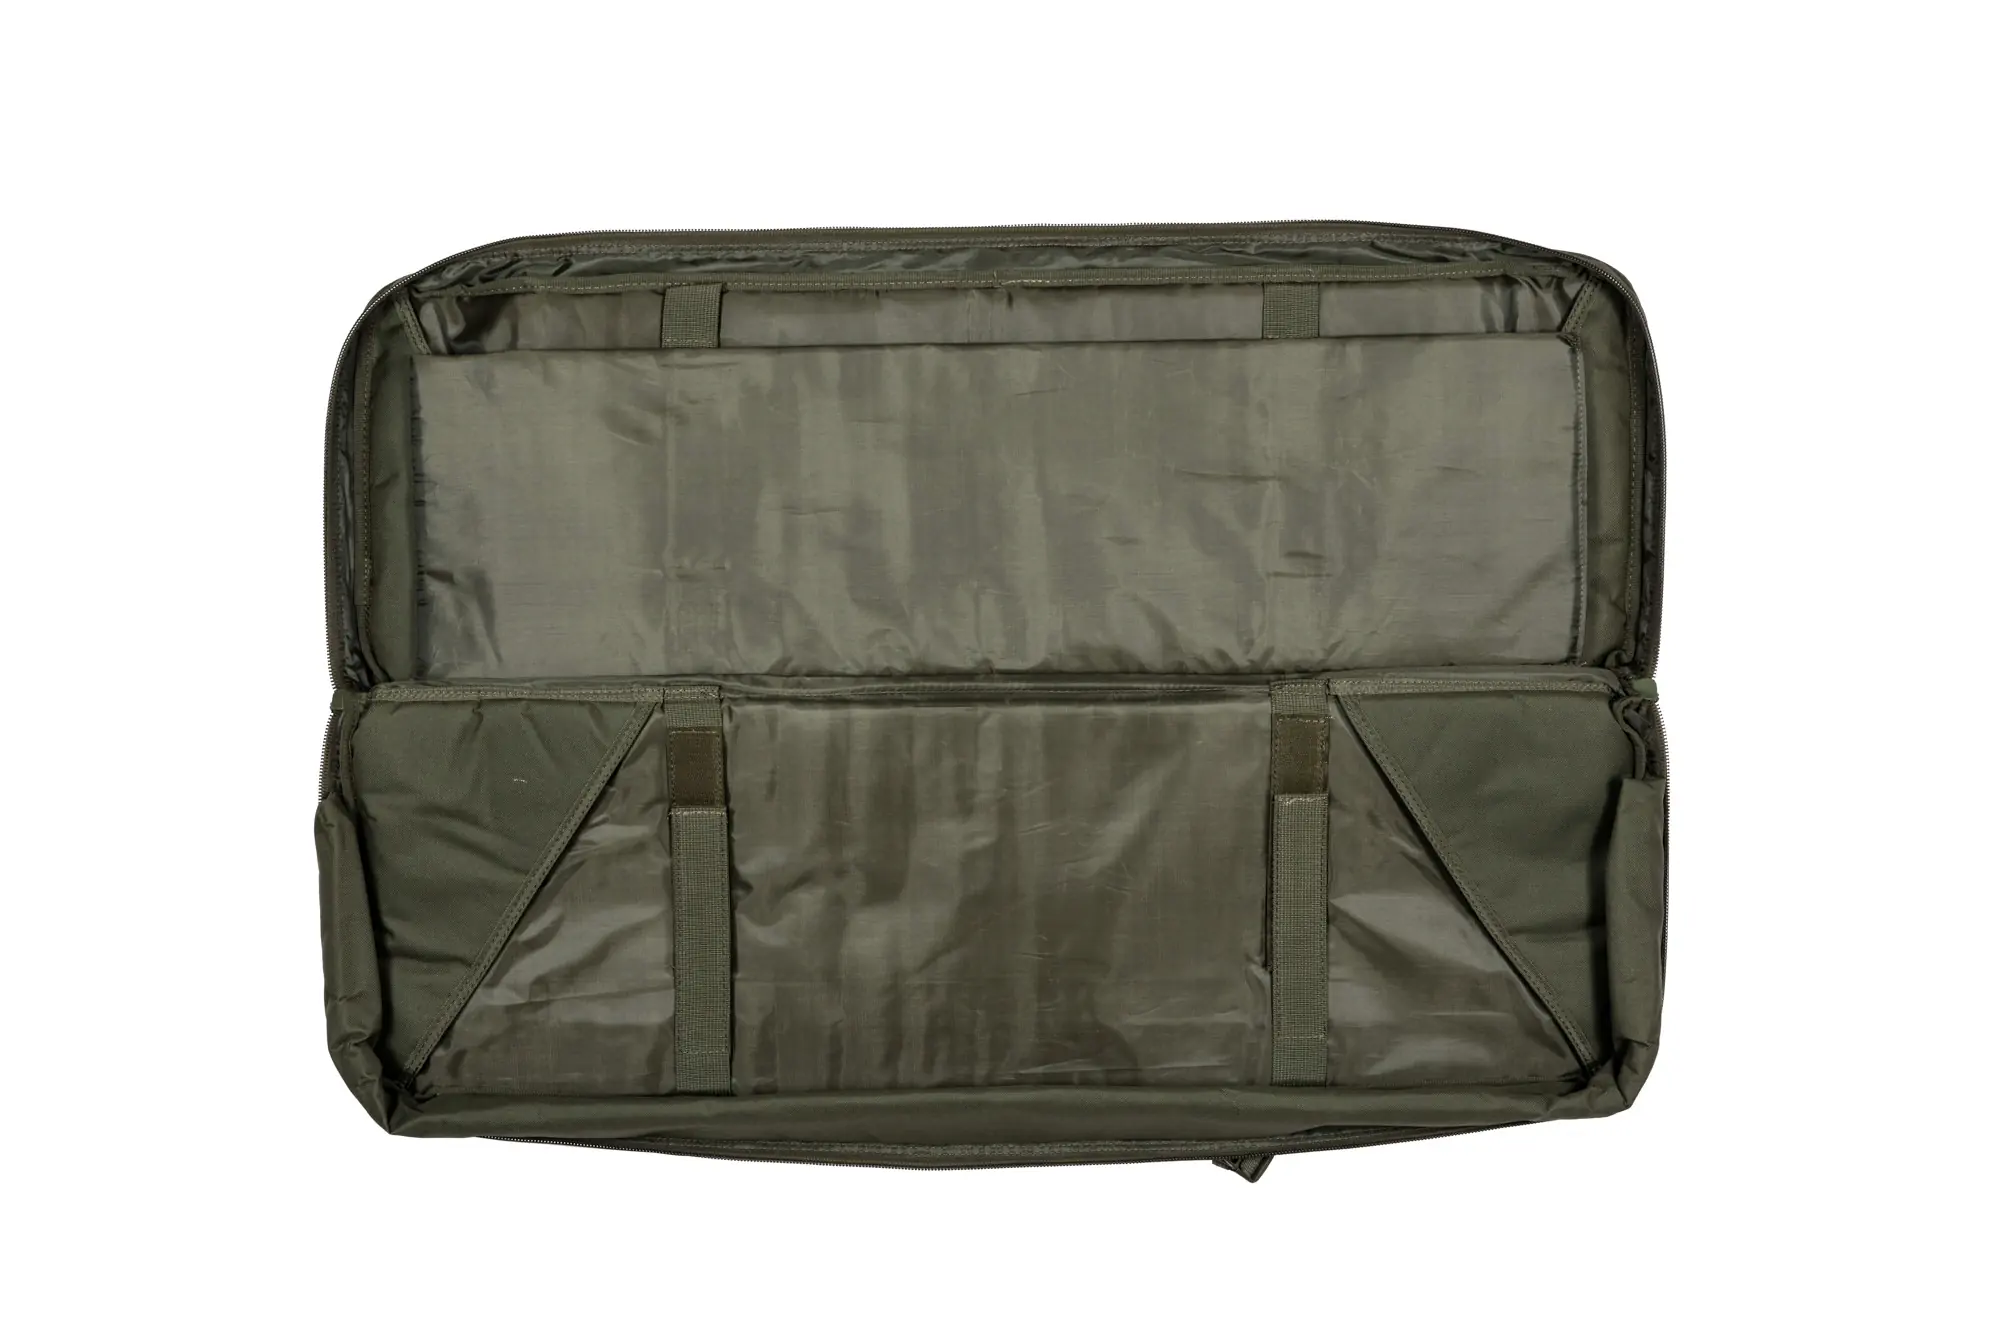 NP PMC Deluxe Soft Double Rifle Bag 36" - Green